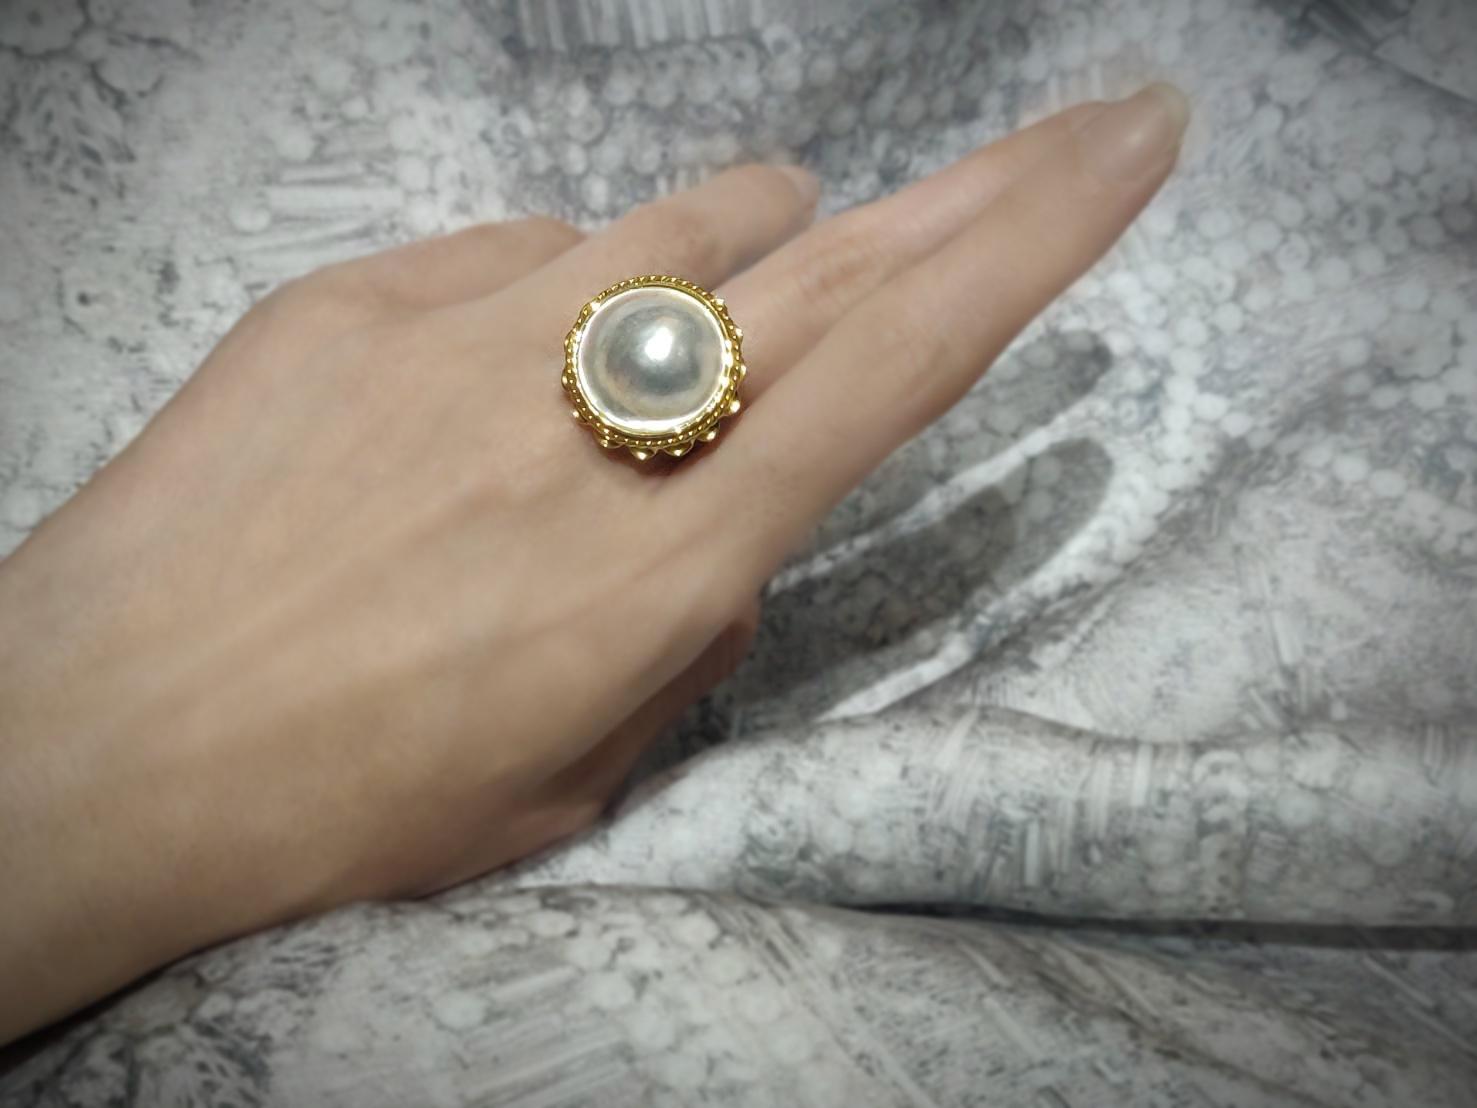 Metal: 18K Yellow Gold
Pearl: Baroque Mabe, 19mm
Total weight: 10.24 g

Ring size: US 10.5
Please let us know should you wish to have the ring resized.